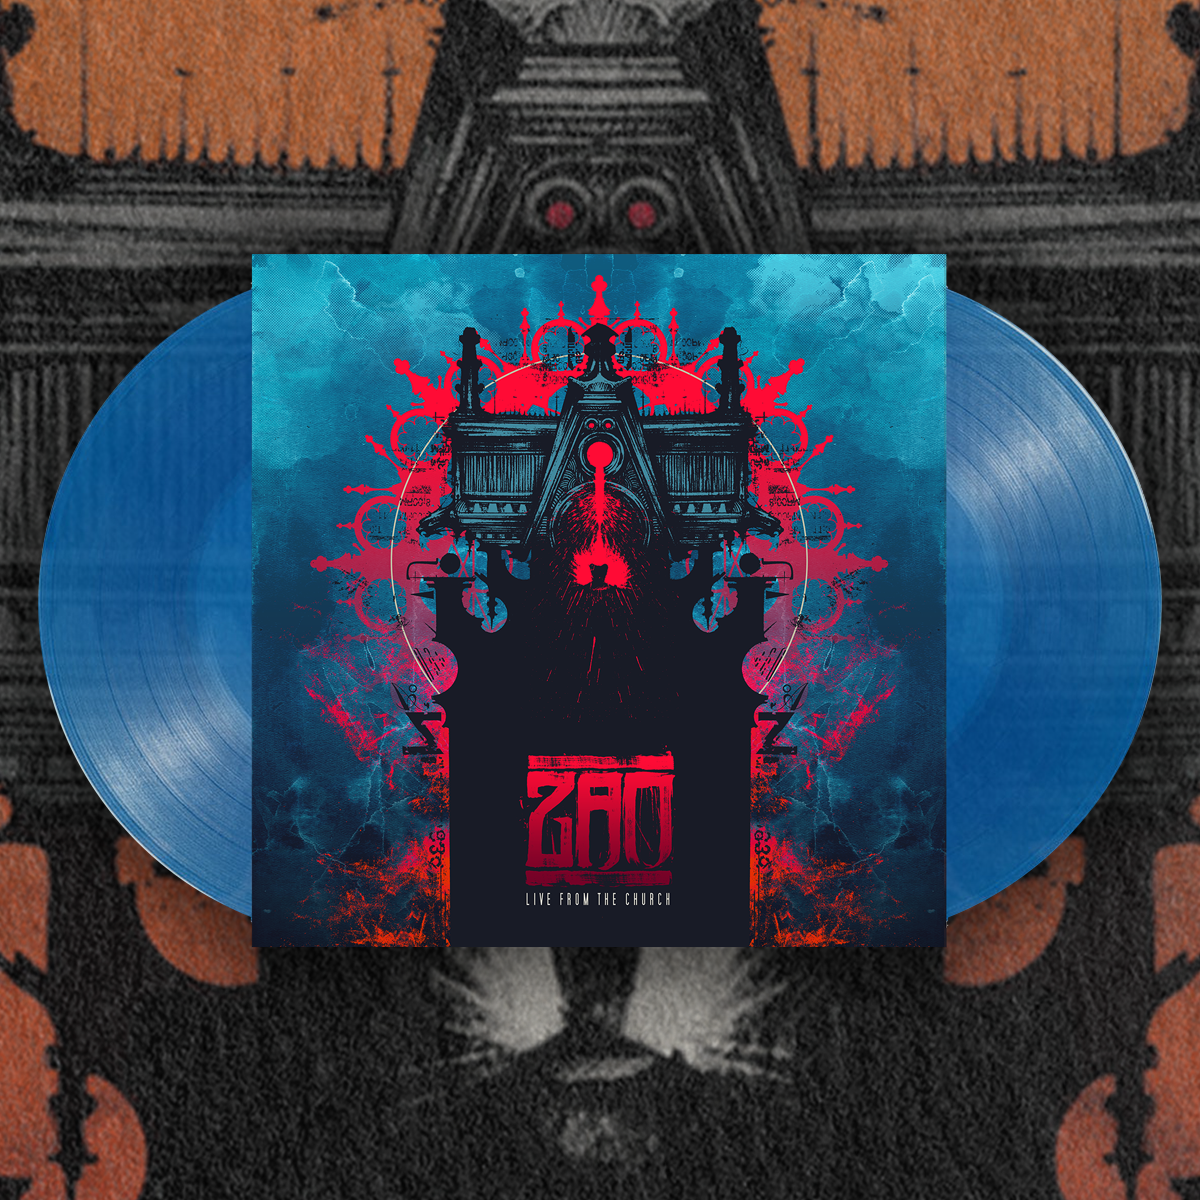 ZAO "LIVE FROM THE CHURCH" Limited Edition 2LP Translucent Cobalt Vinyl (PRE-ORDER)